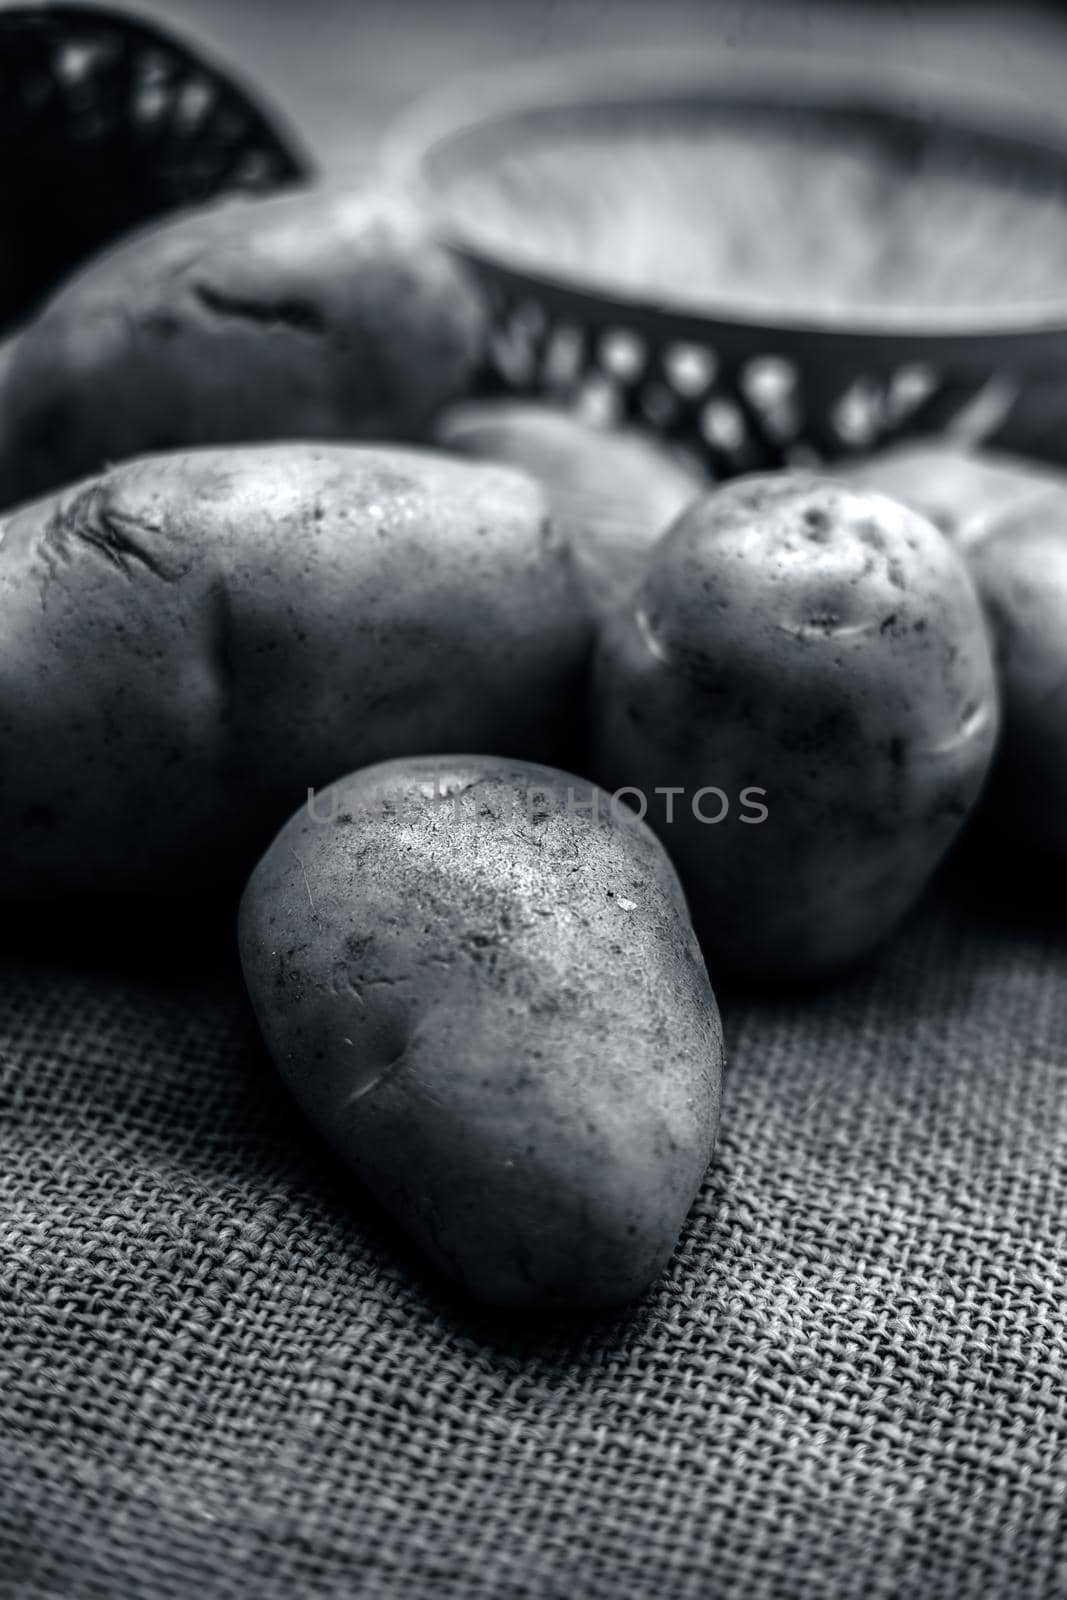 Close up shot of potato or aloo or alu on jute bag surface along with two vegetable and fruit hampers.